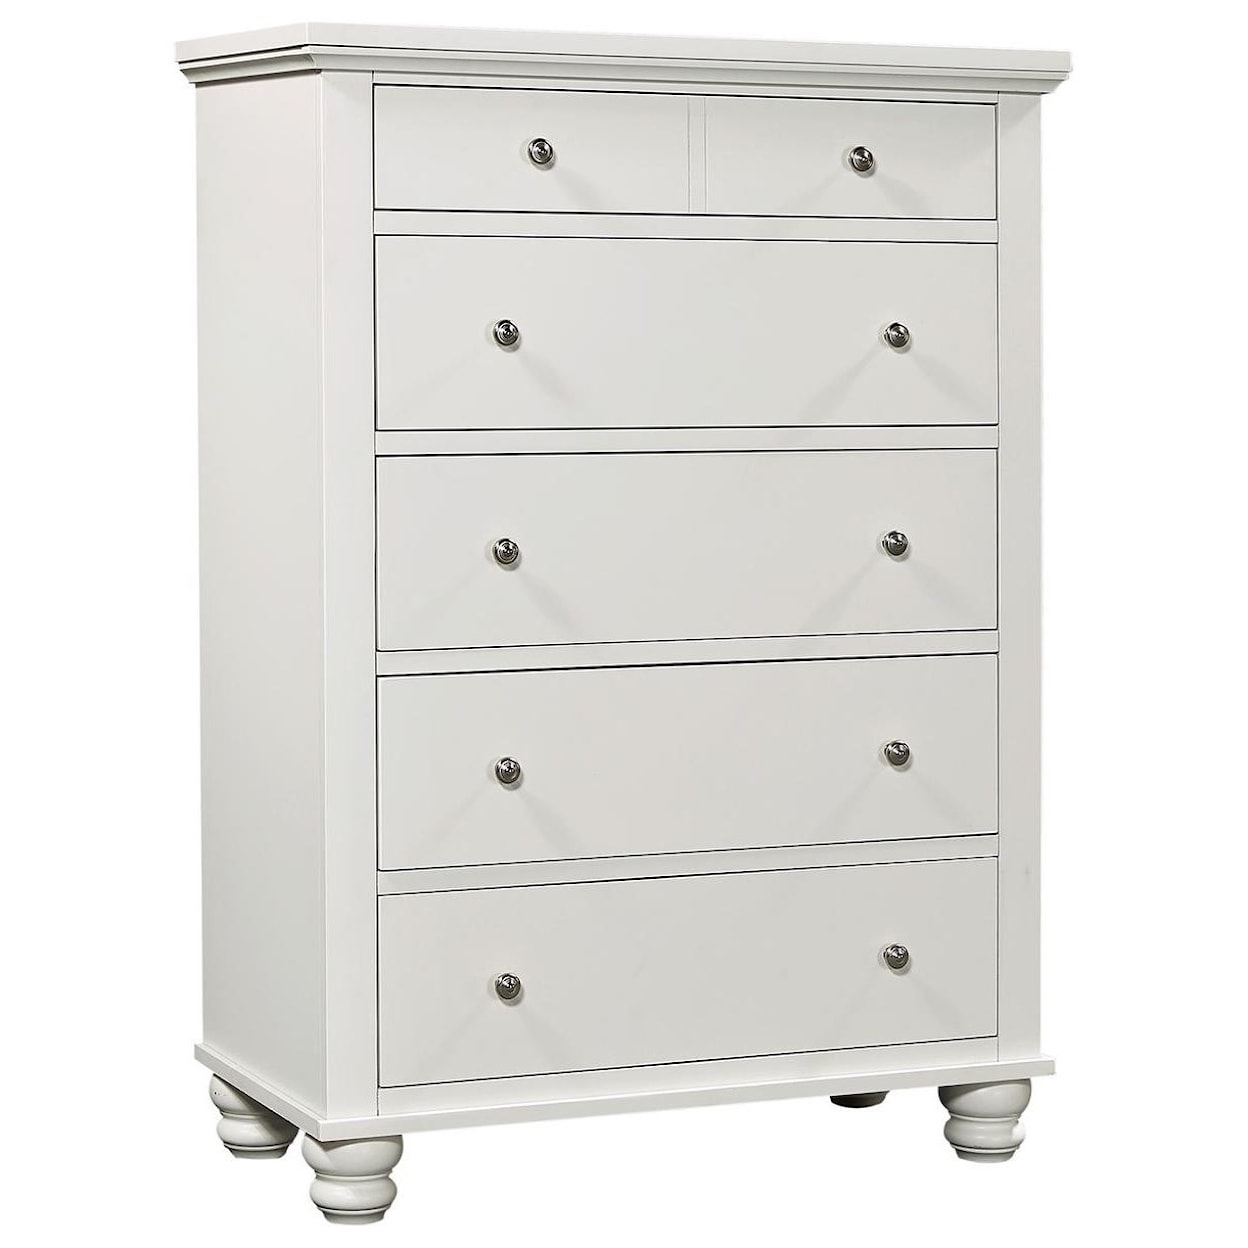 Aspenhome Cambridge CHY 5 Drawer Chest